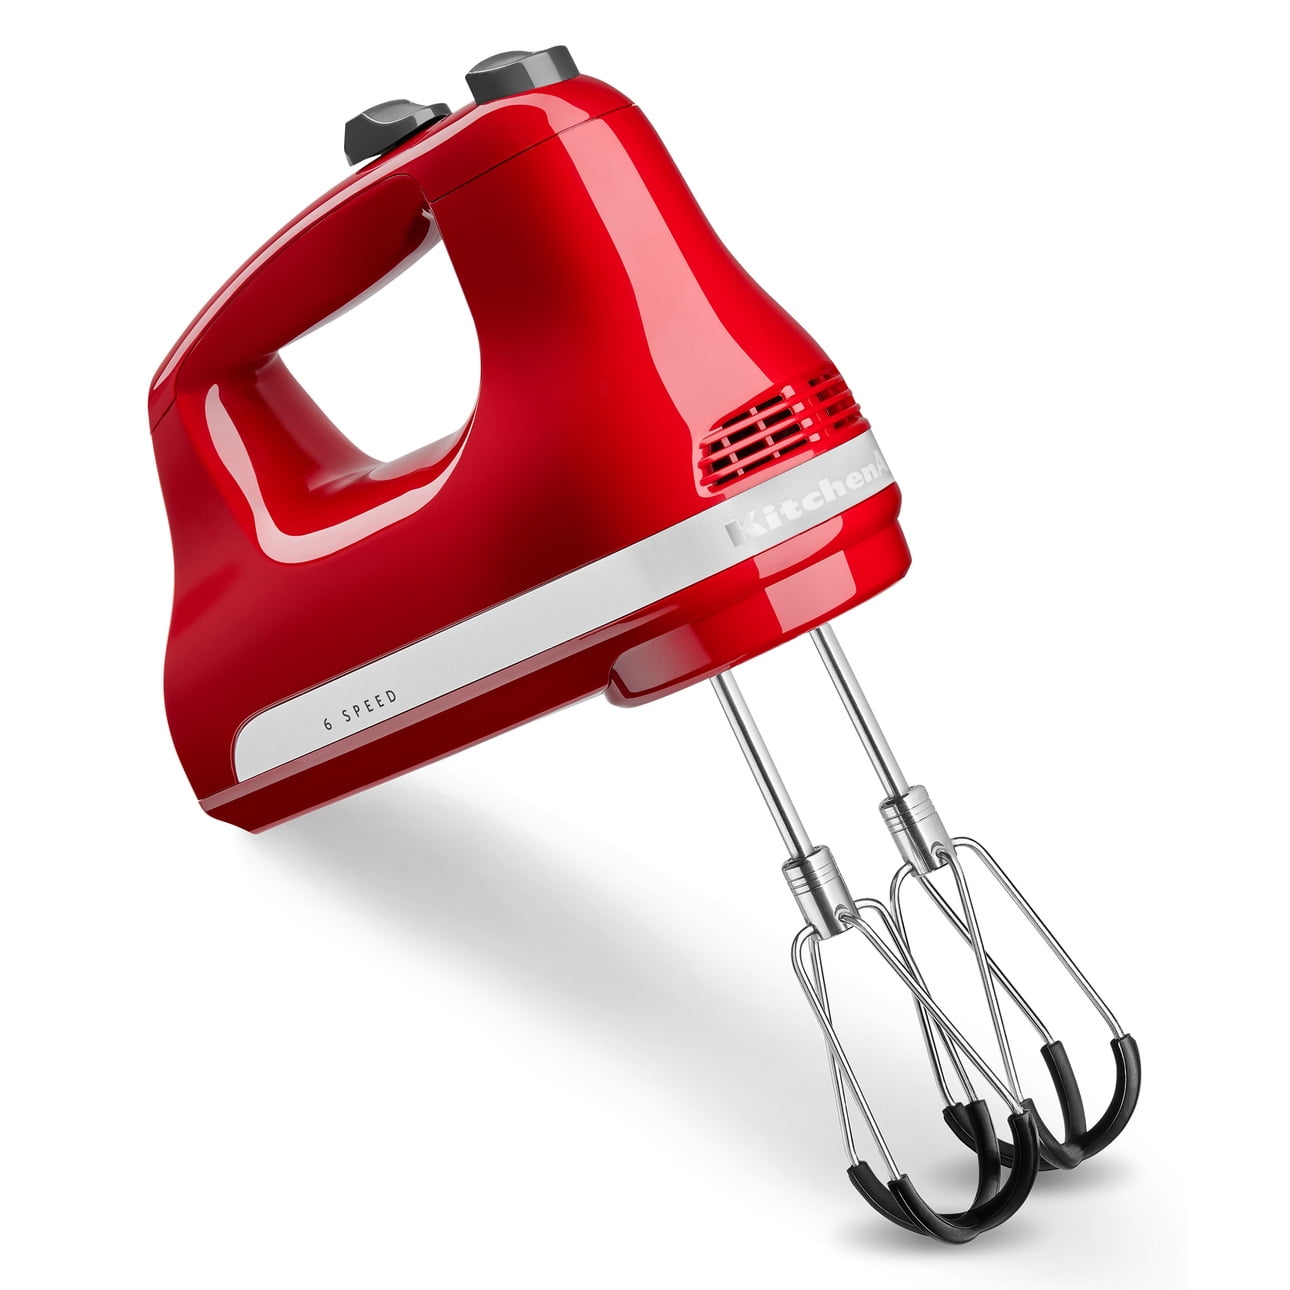 Works Great for sale online KitchenAid Classic 3 Speed Hand Mixer Model KHM3WH5 